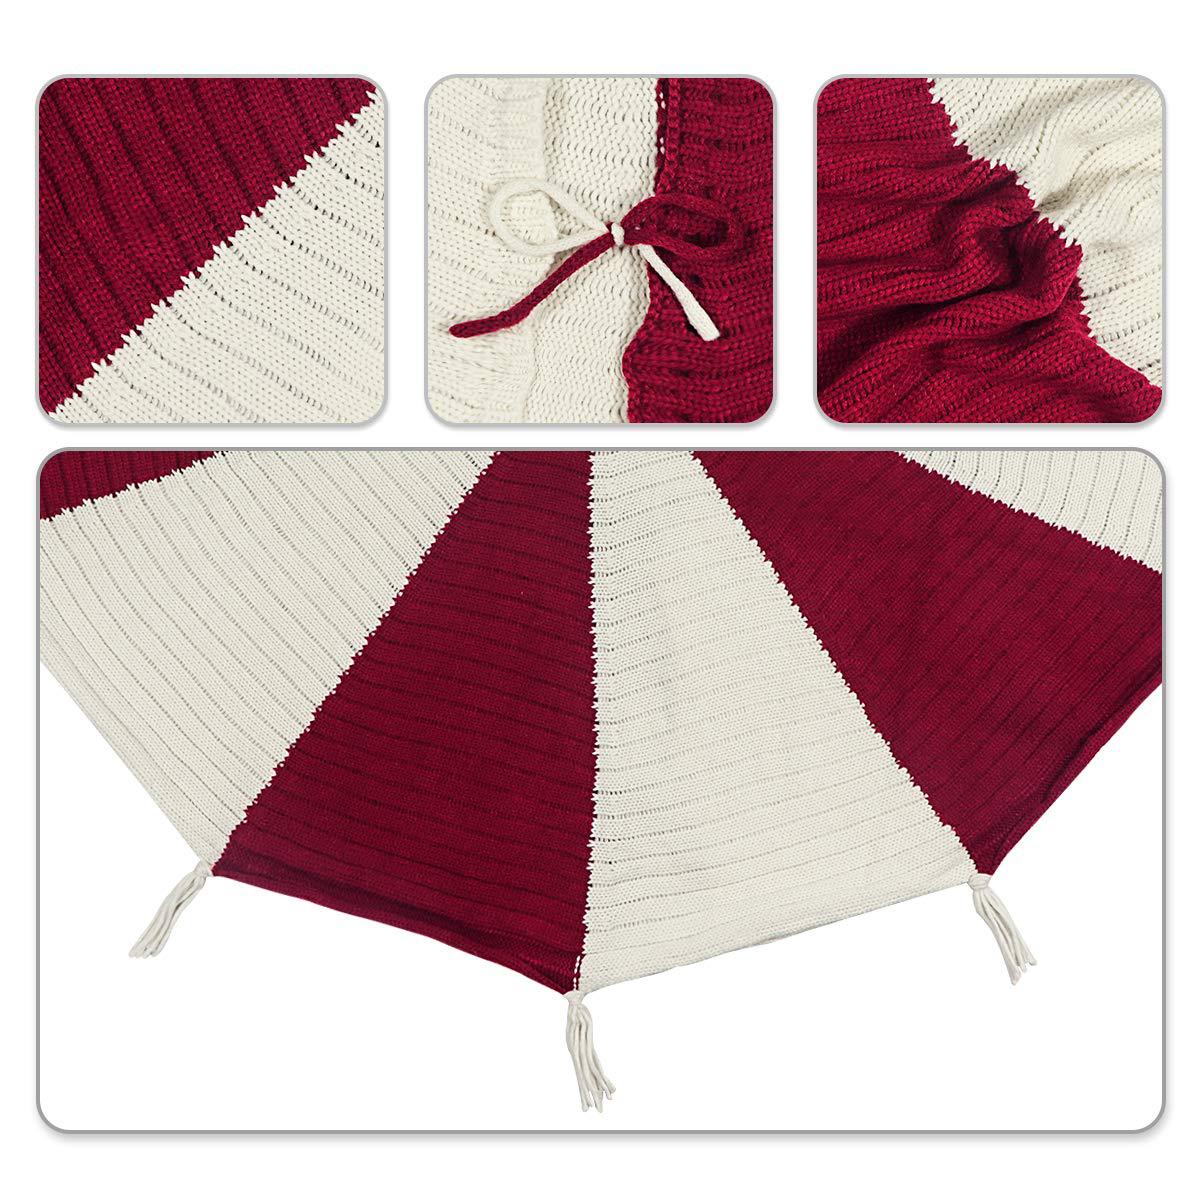 Christmas Tree Bottom Decoration Red And White Tassel Knitted Christmas-tree Skirt